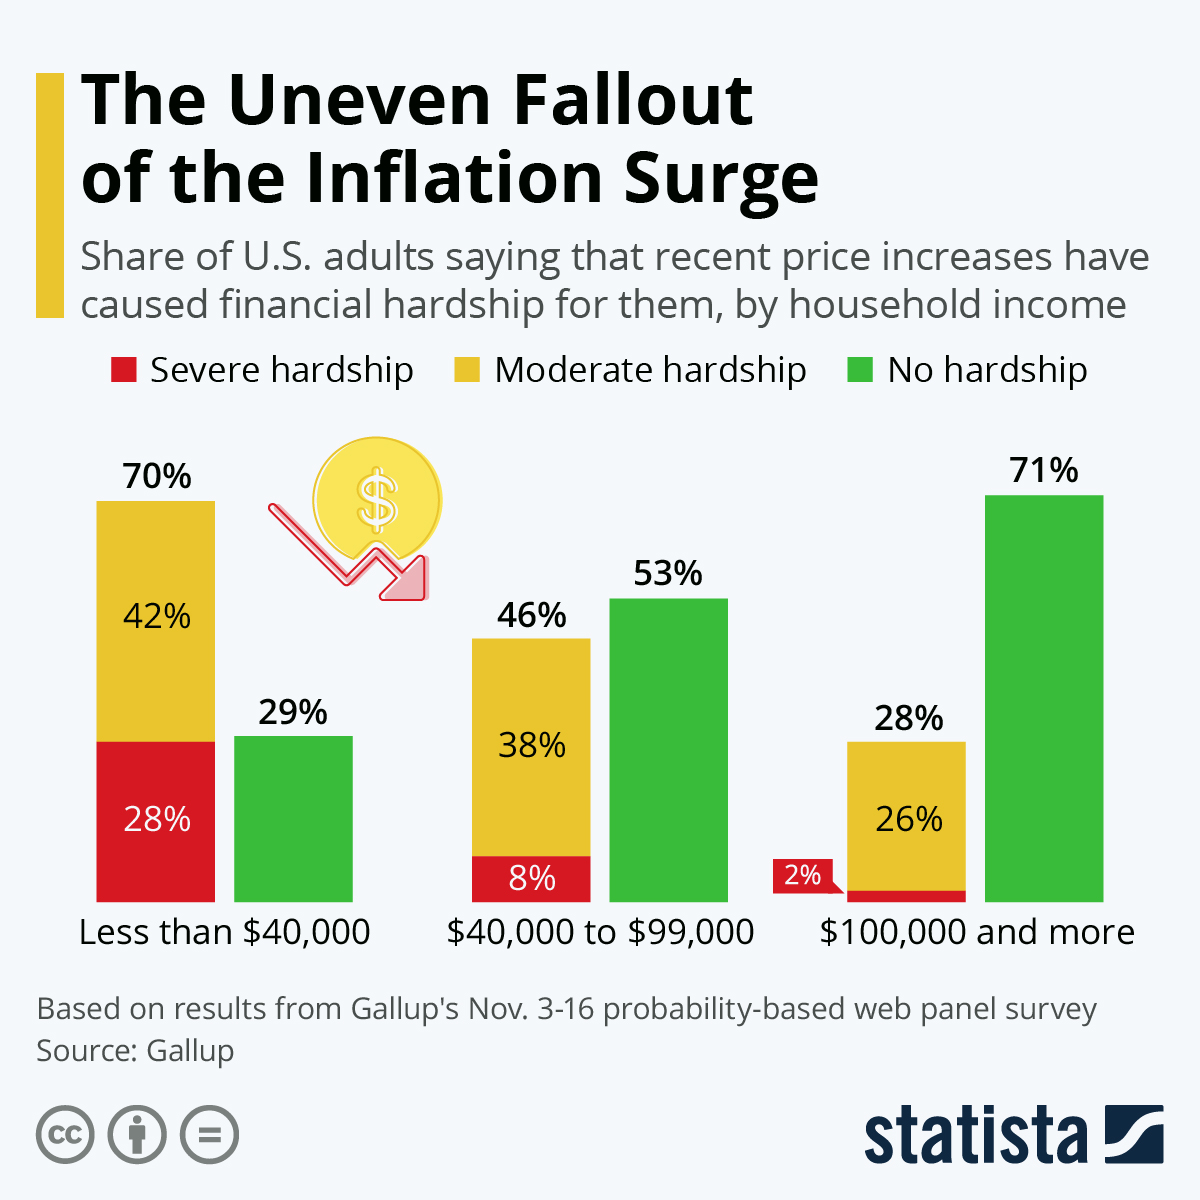 The Uneven Fallout of the Inflation Surge
